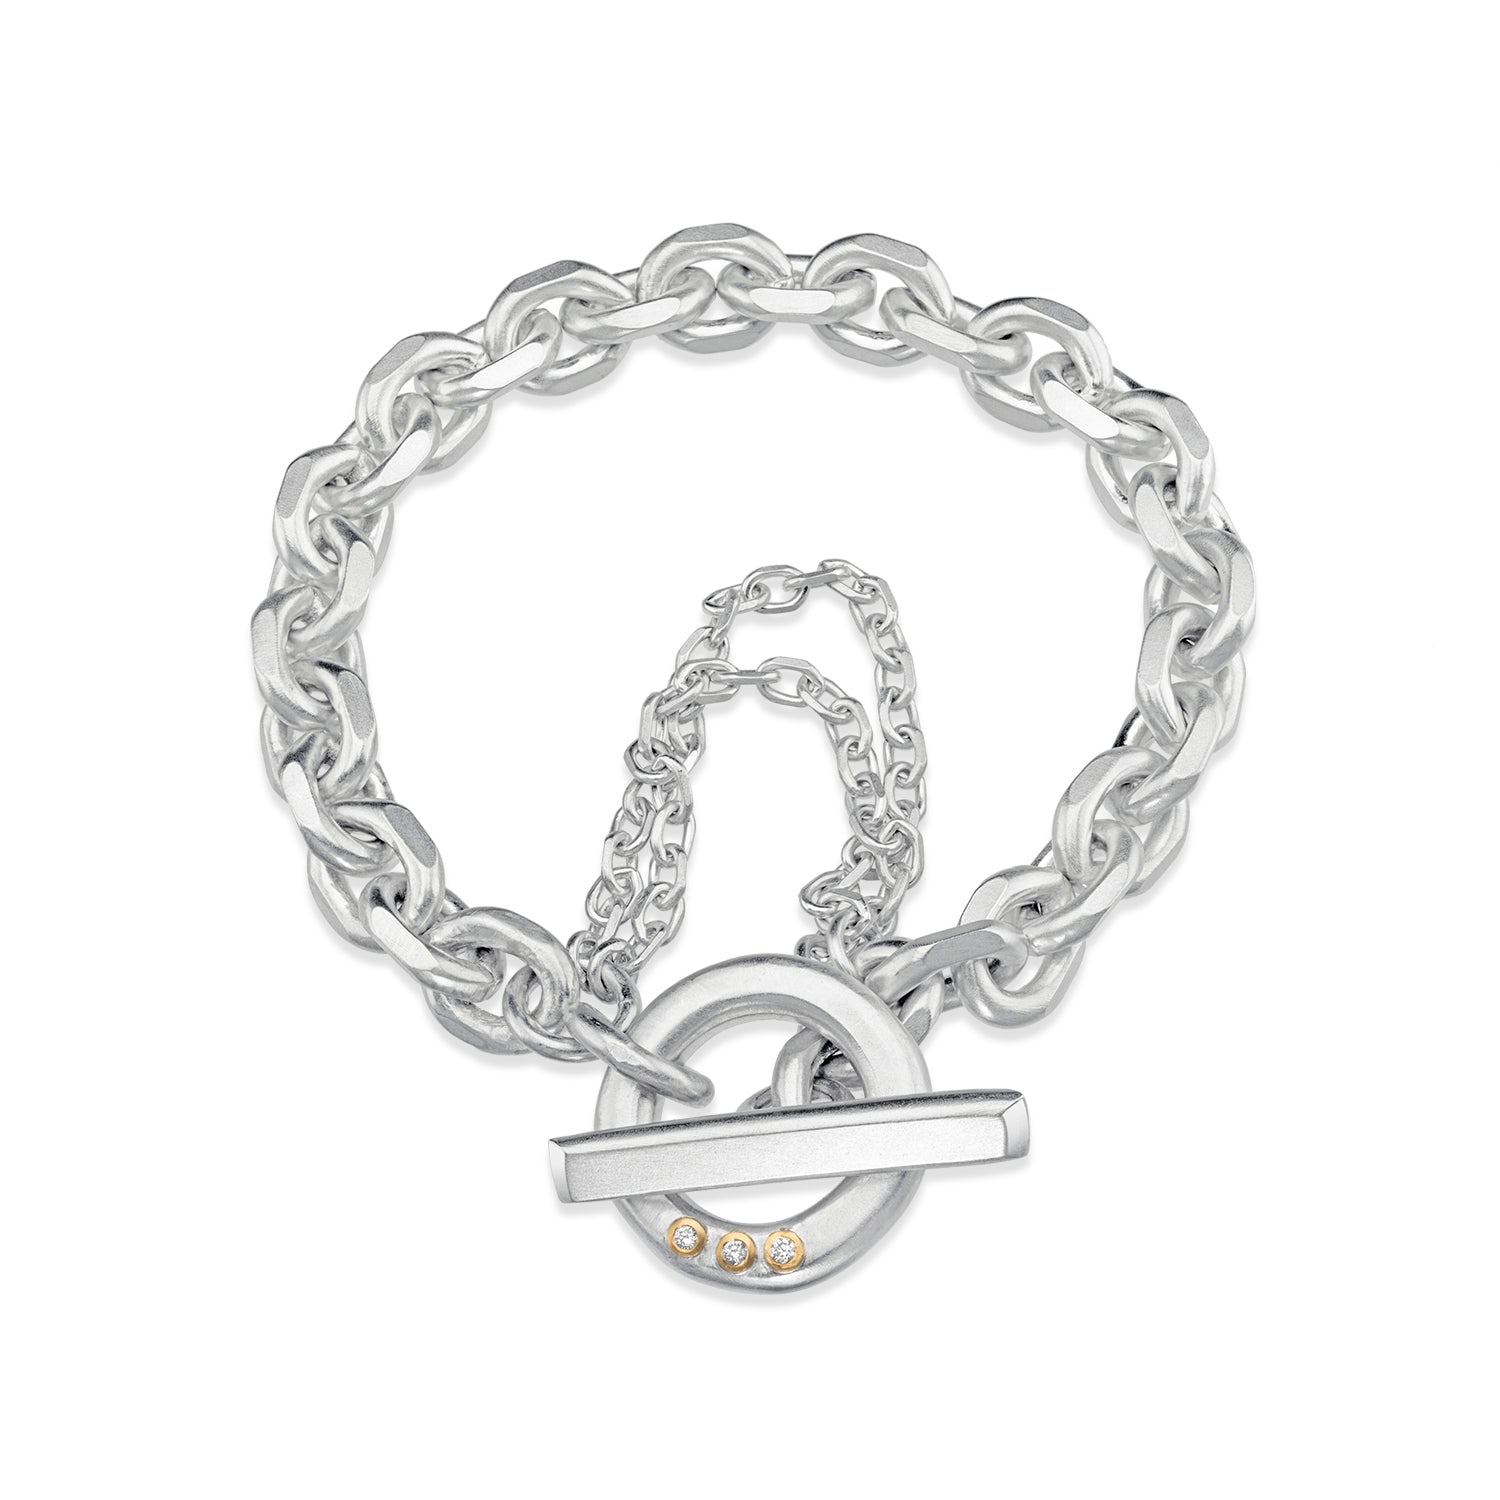 Chunky Silver and 18ct Gold Diamond Bracelet with Safety Chain